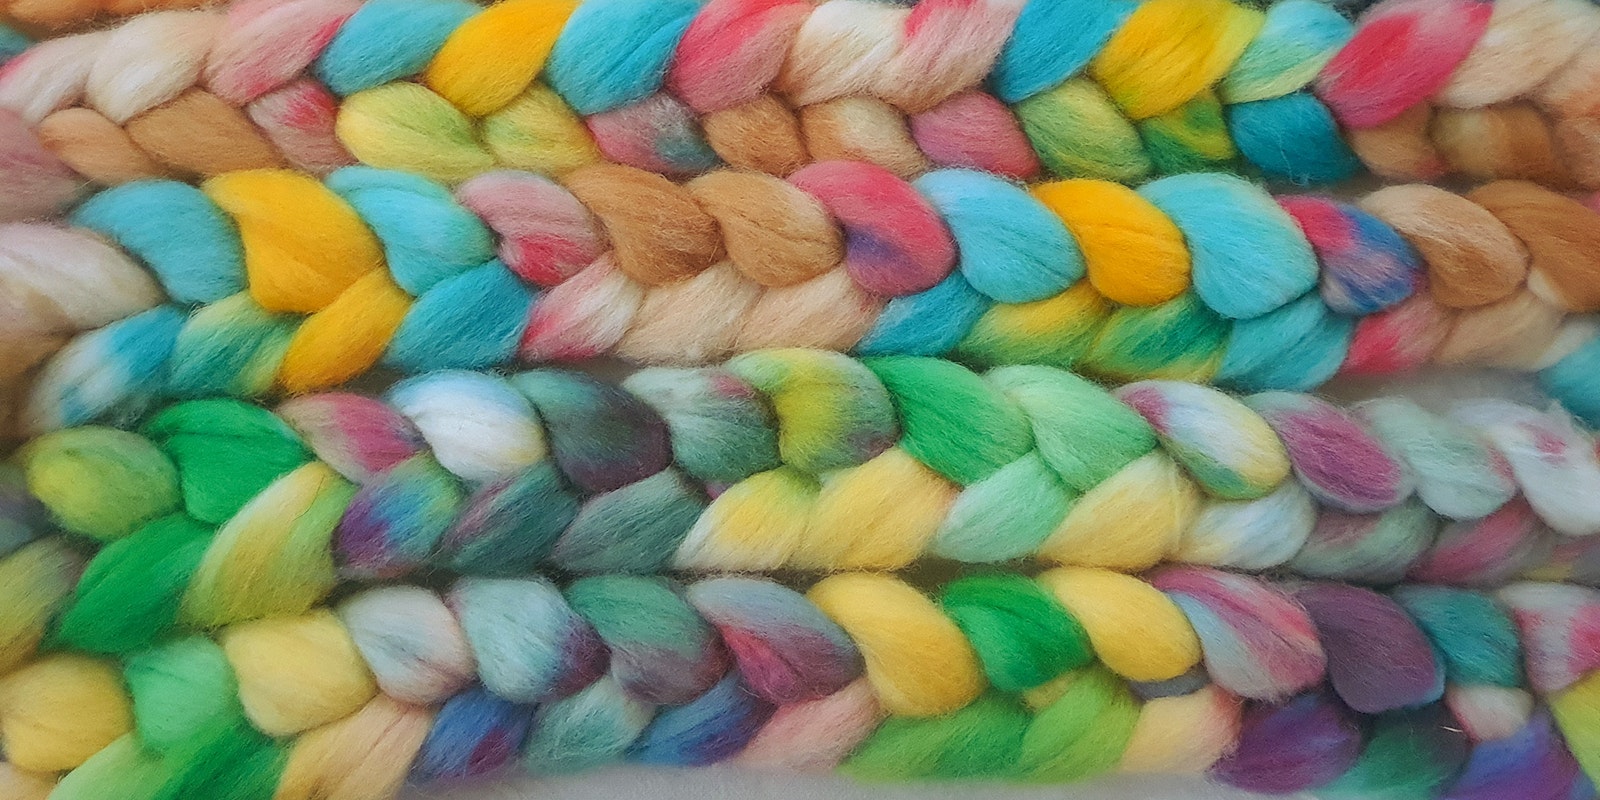 Wild & Crazy Dyes: Dyeing Yarn with Food Coloring